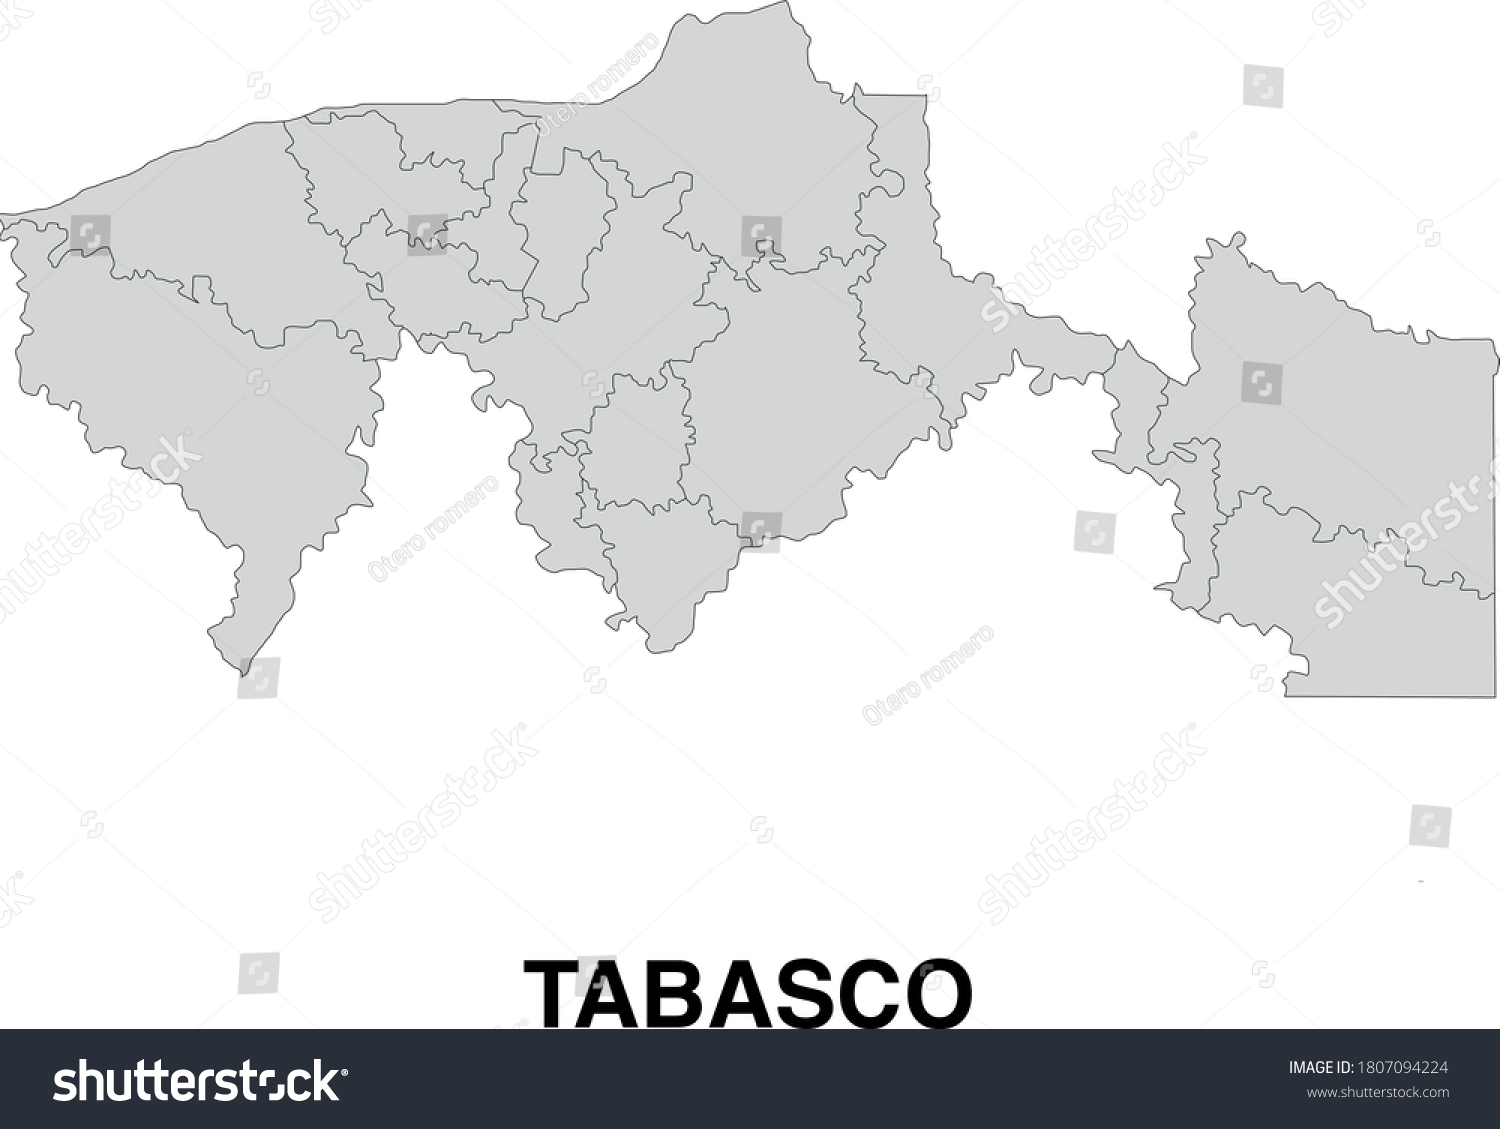 Vector Map Of Tabasco Mexico Divided Into Royalty Free Stock Vector 1807094224 3425